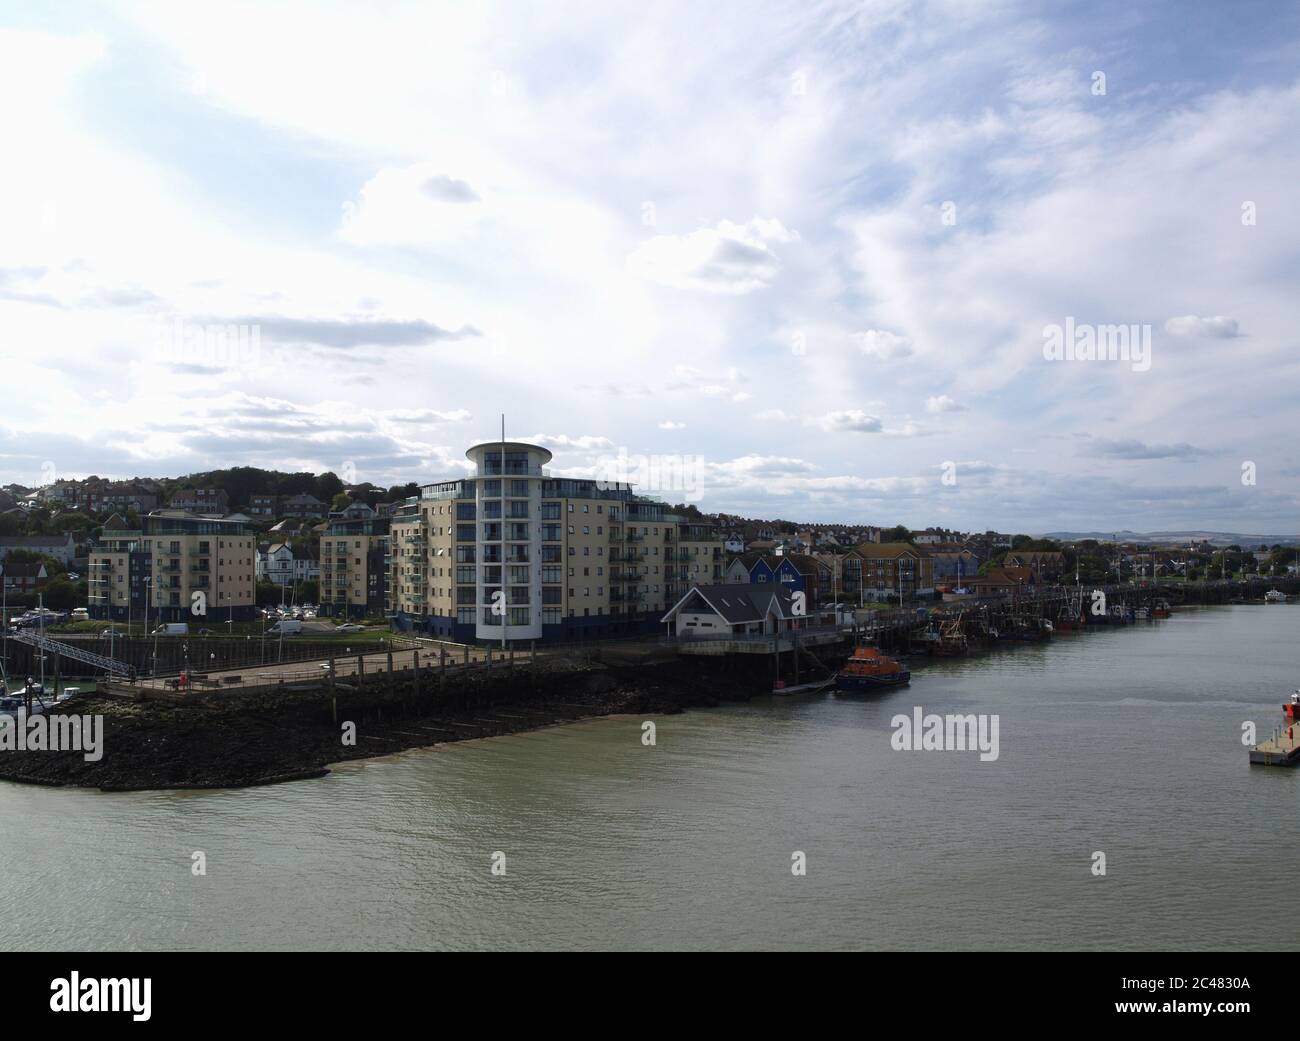 View of marina housing at Newhaven, East Sussex taken from  the Seven Sisters cross channel ferry Stock Photo